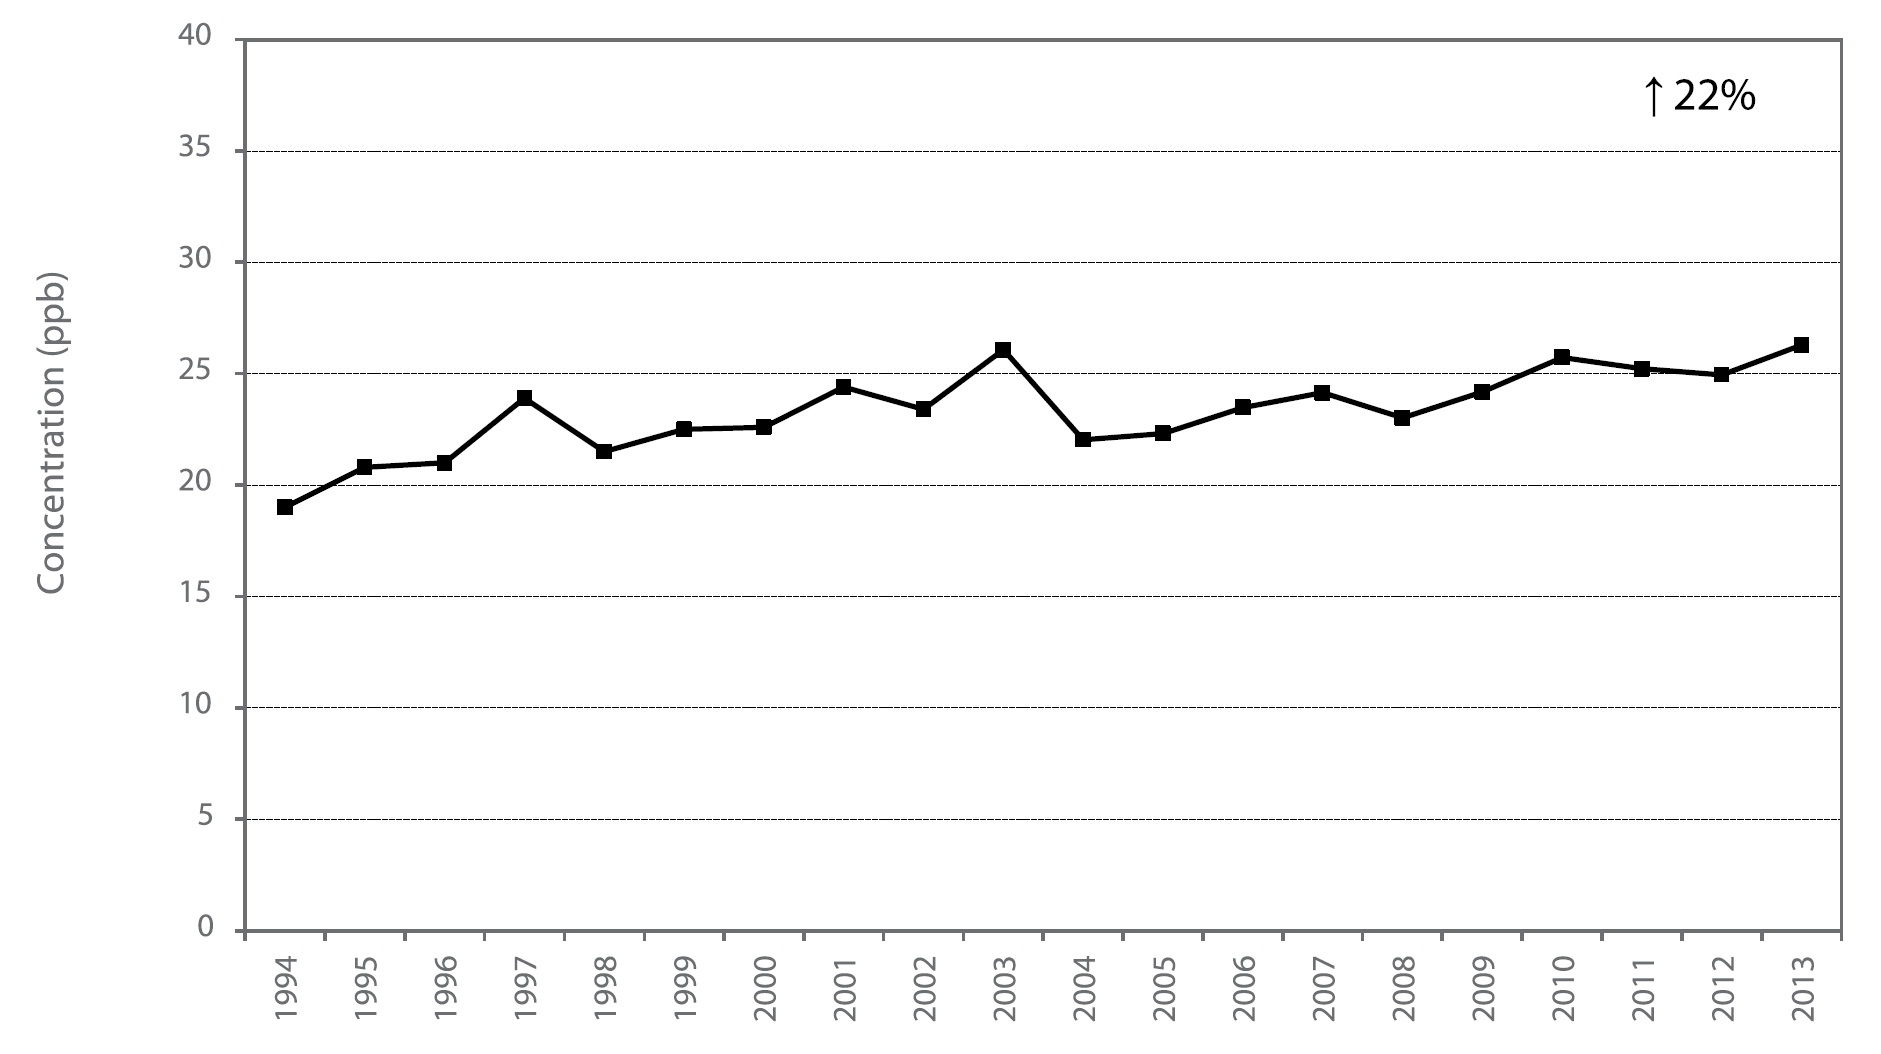 Figure A23 is a line chart displaying the ozone annual mean at Thunder Bay from 1994 to 2013. Over this 20-year period, ozone increased 22%.